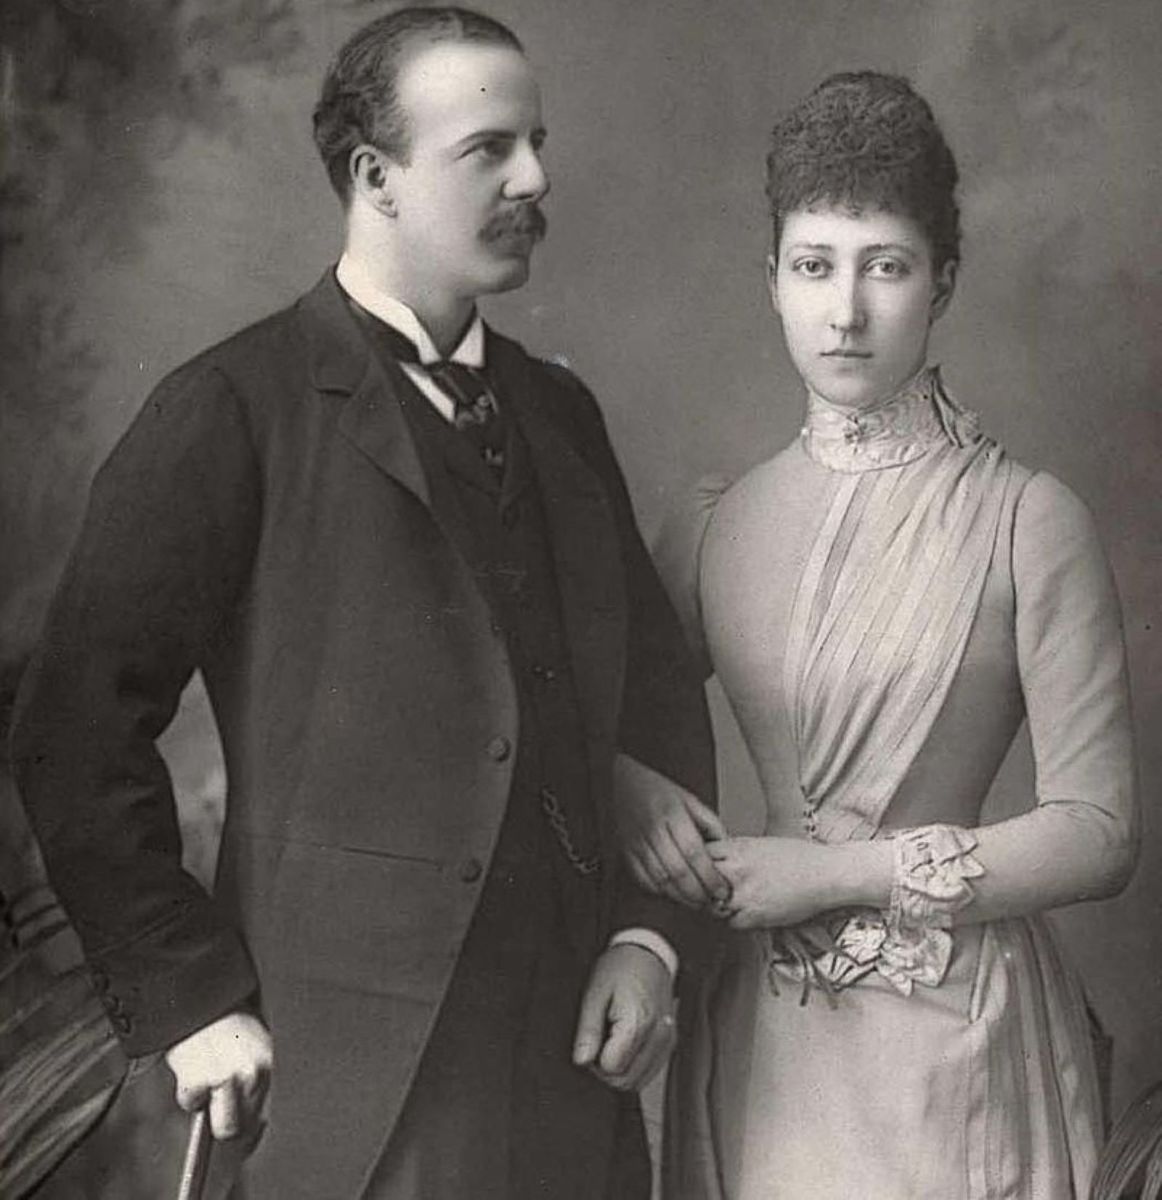 Maud's parents Princess Louise, 1st Duchess of Fife and Alexander Duff, 1st Duke of Fife in 1889 around the time of their marriage.